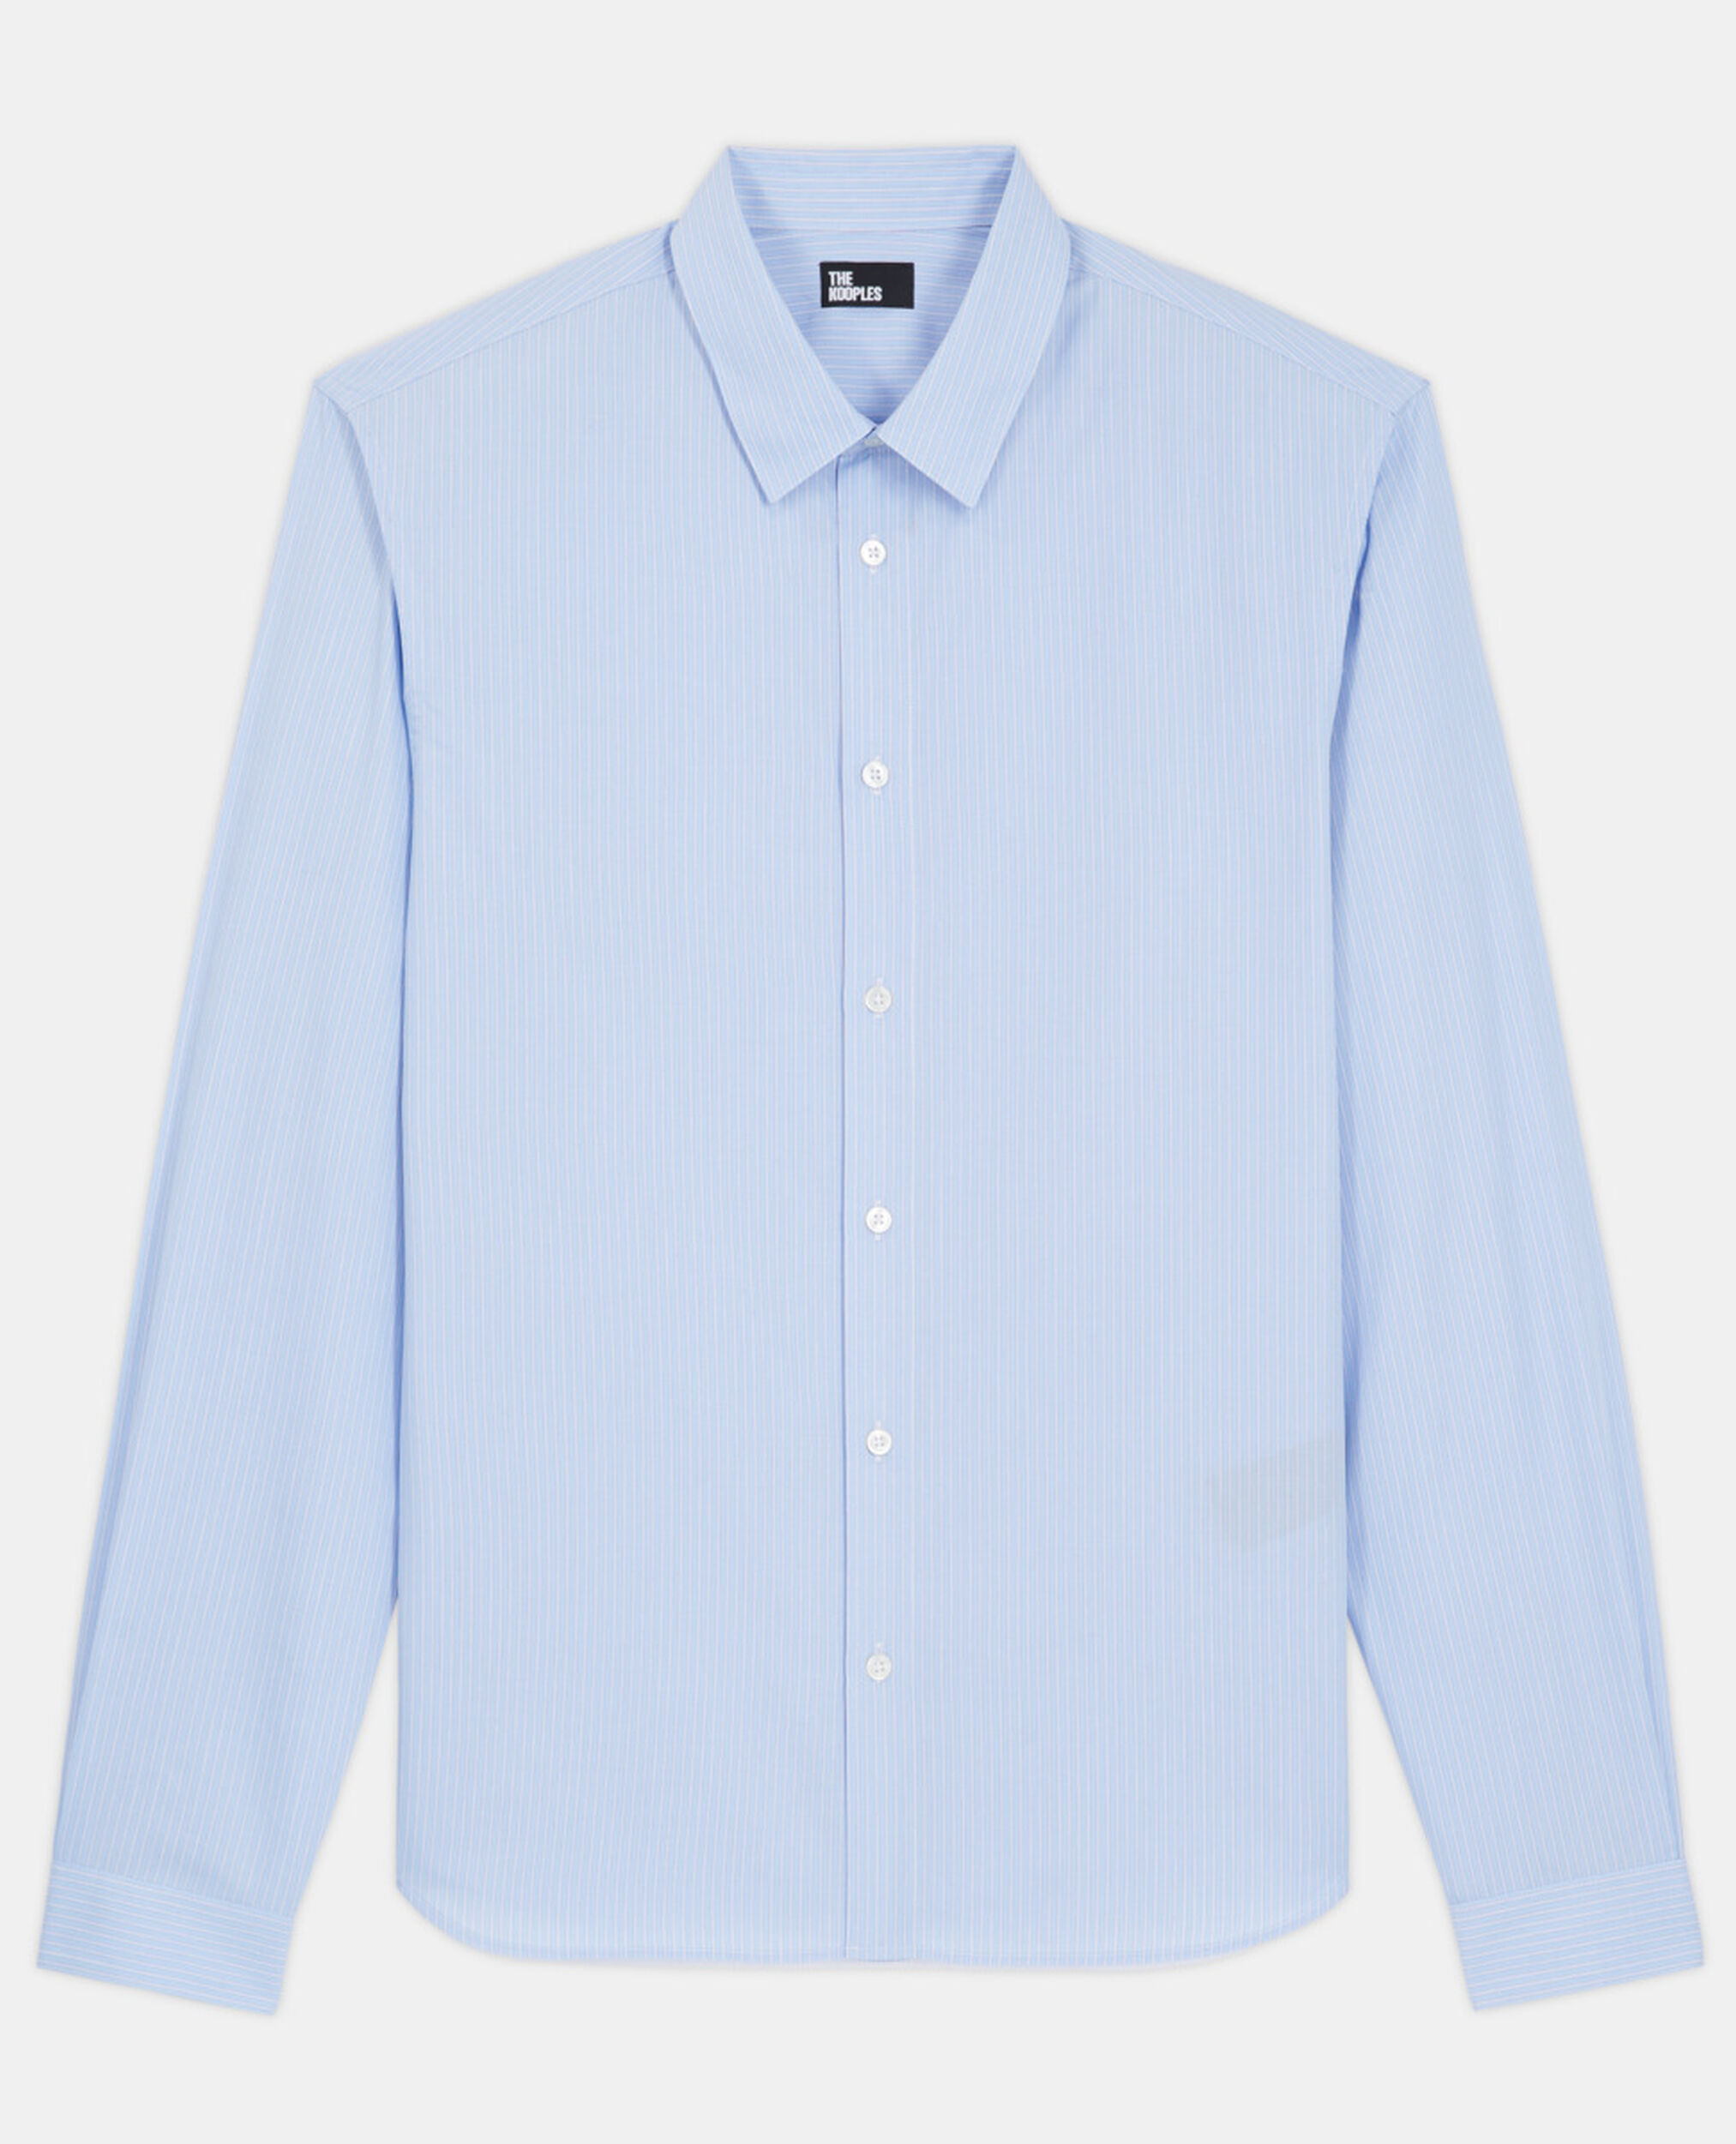 Striped shirt with classic ocllar, WHITE / SKY BLUE, hi-res image number null